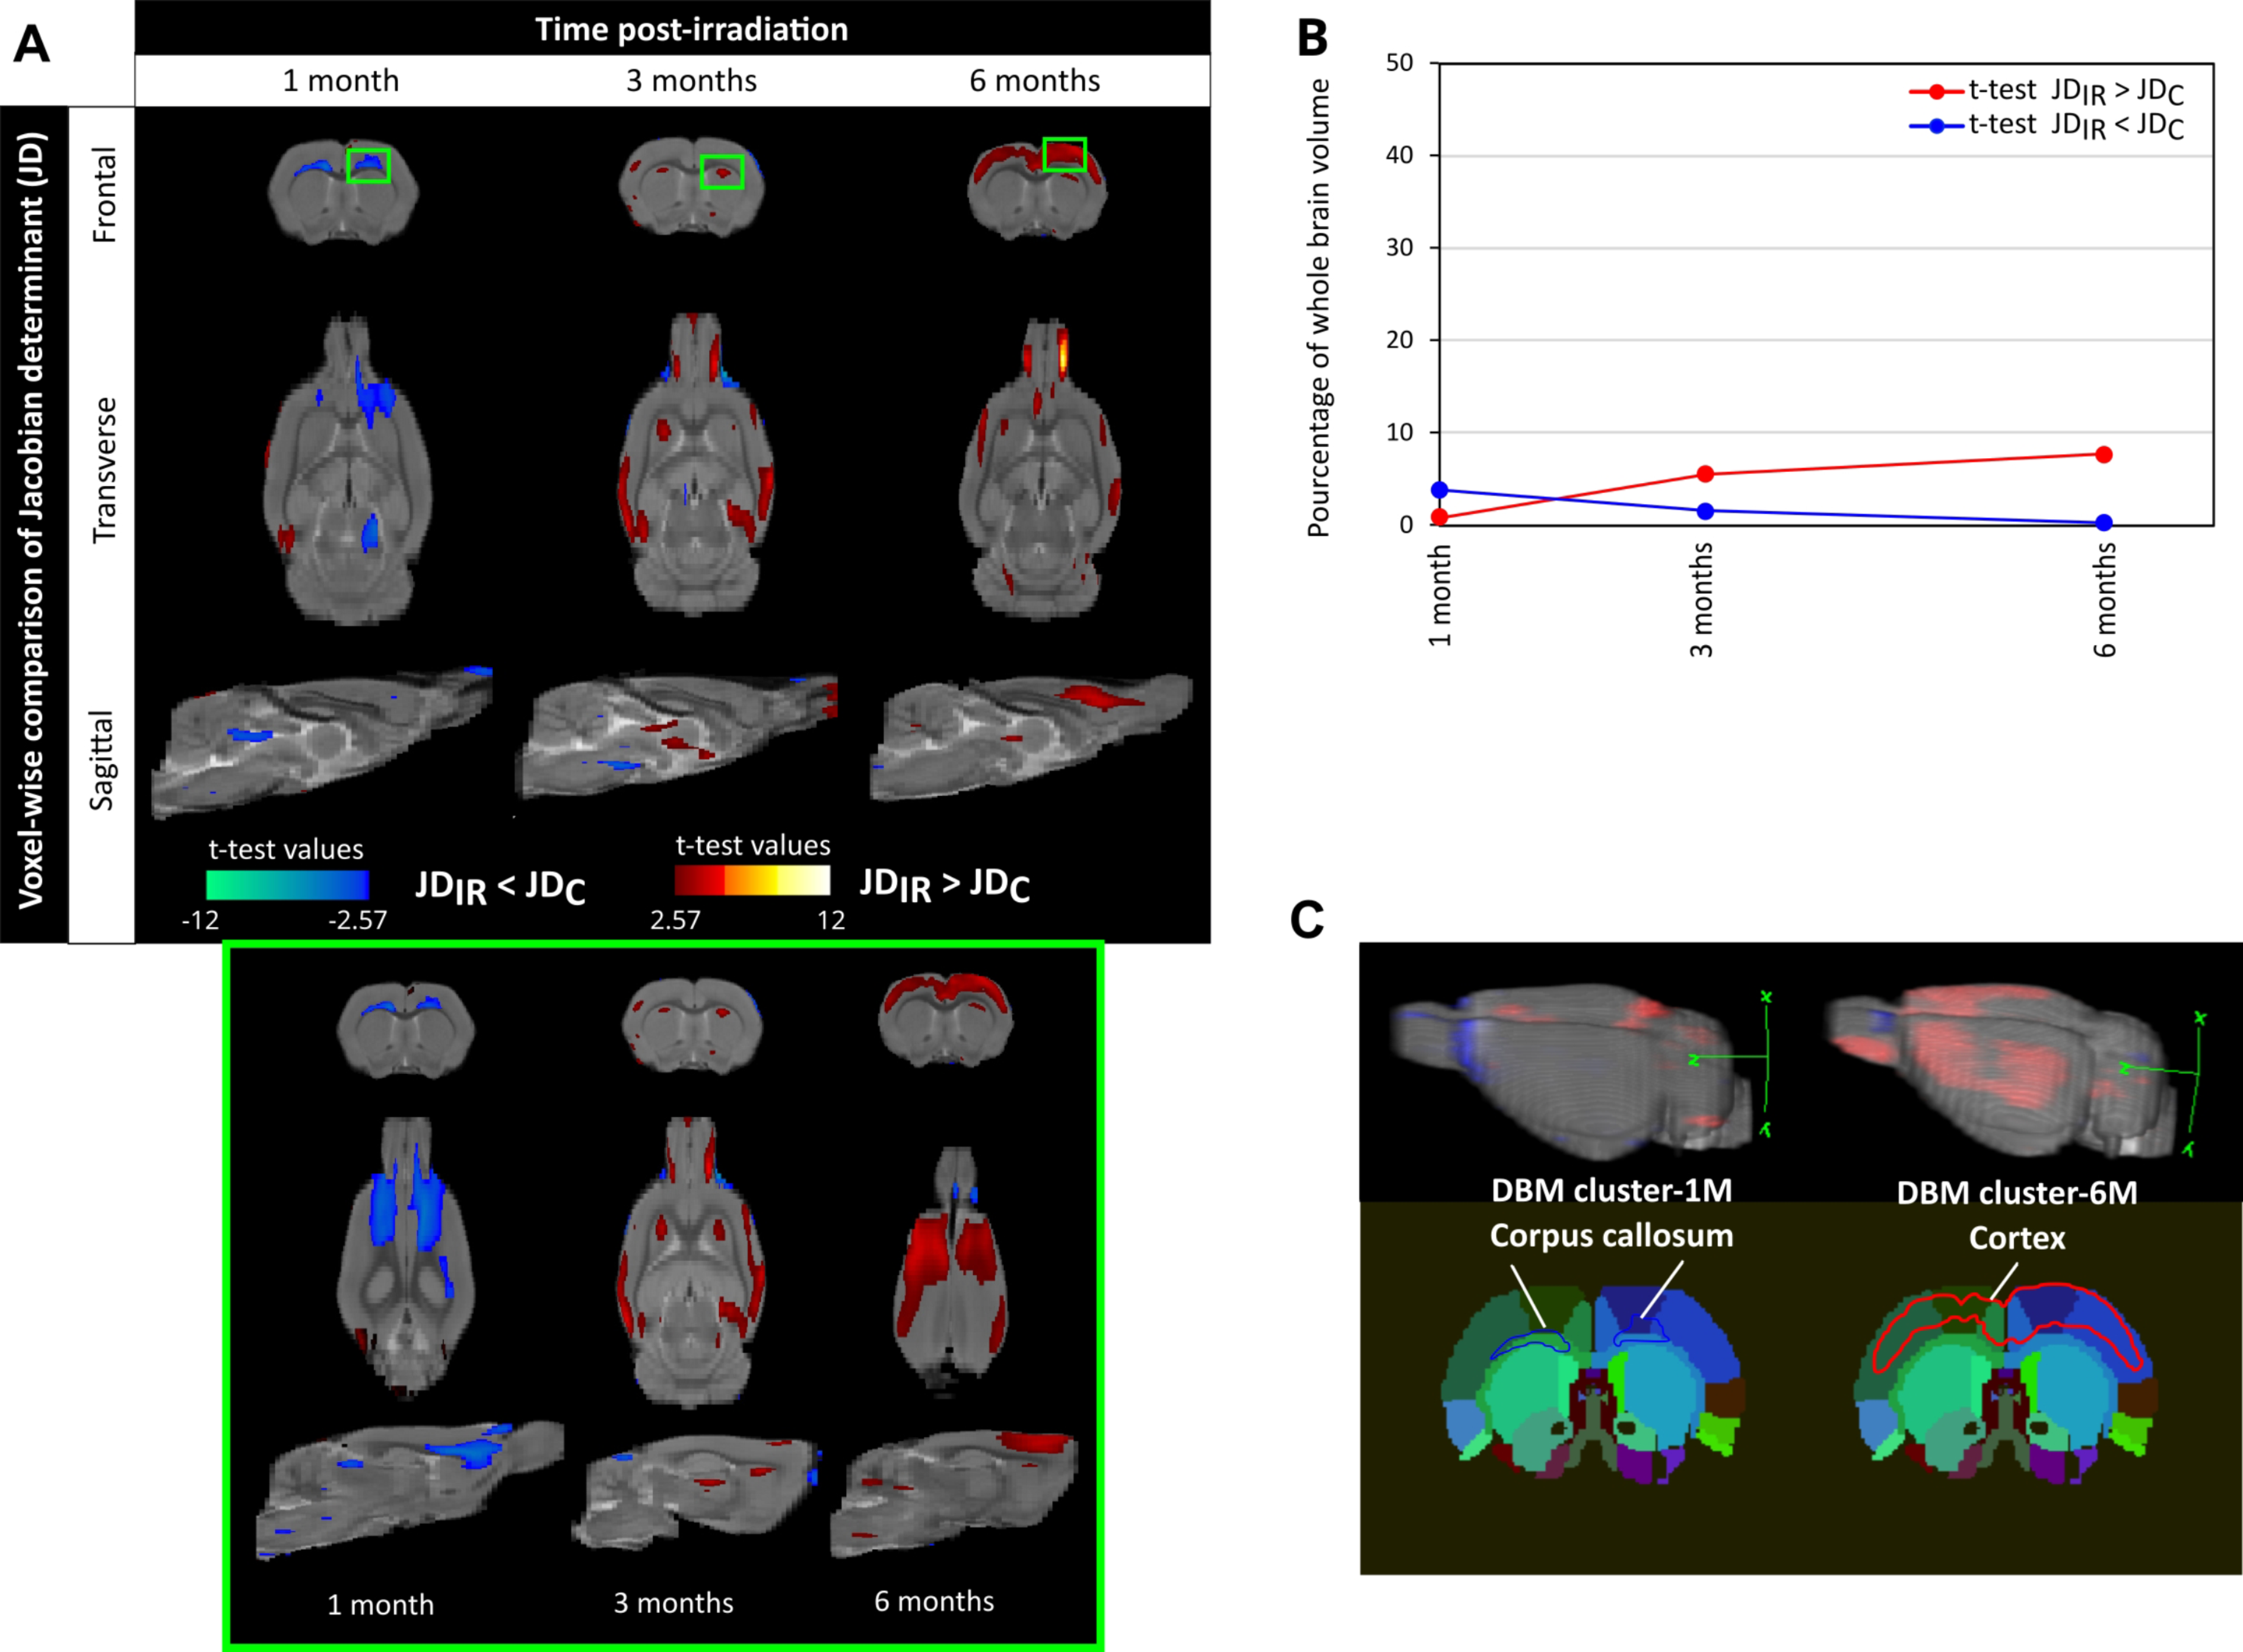 Deformation-based morphometry: a sensitive imaging approach to detect radiation-induced brain injury?